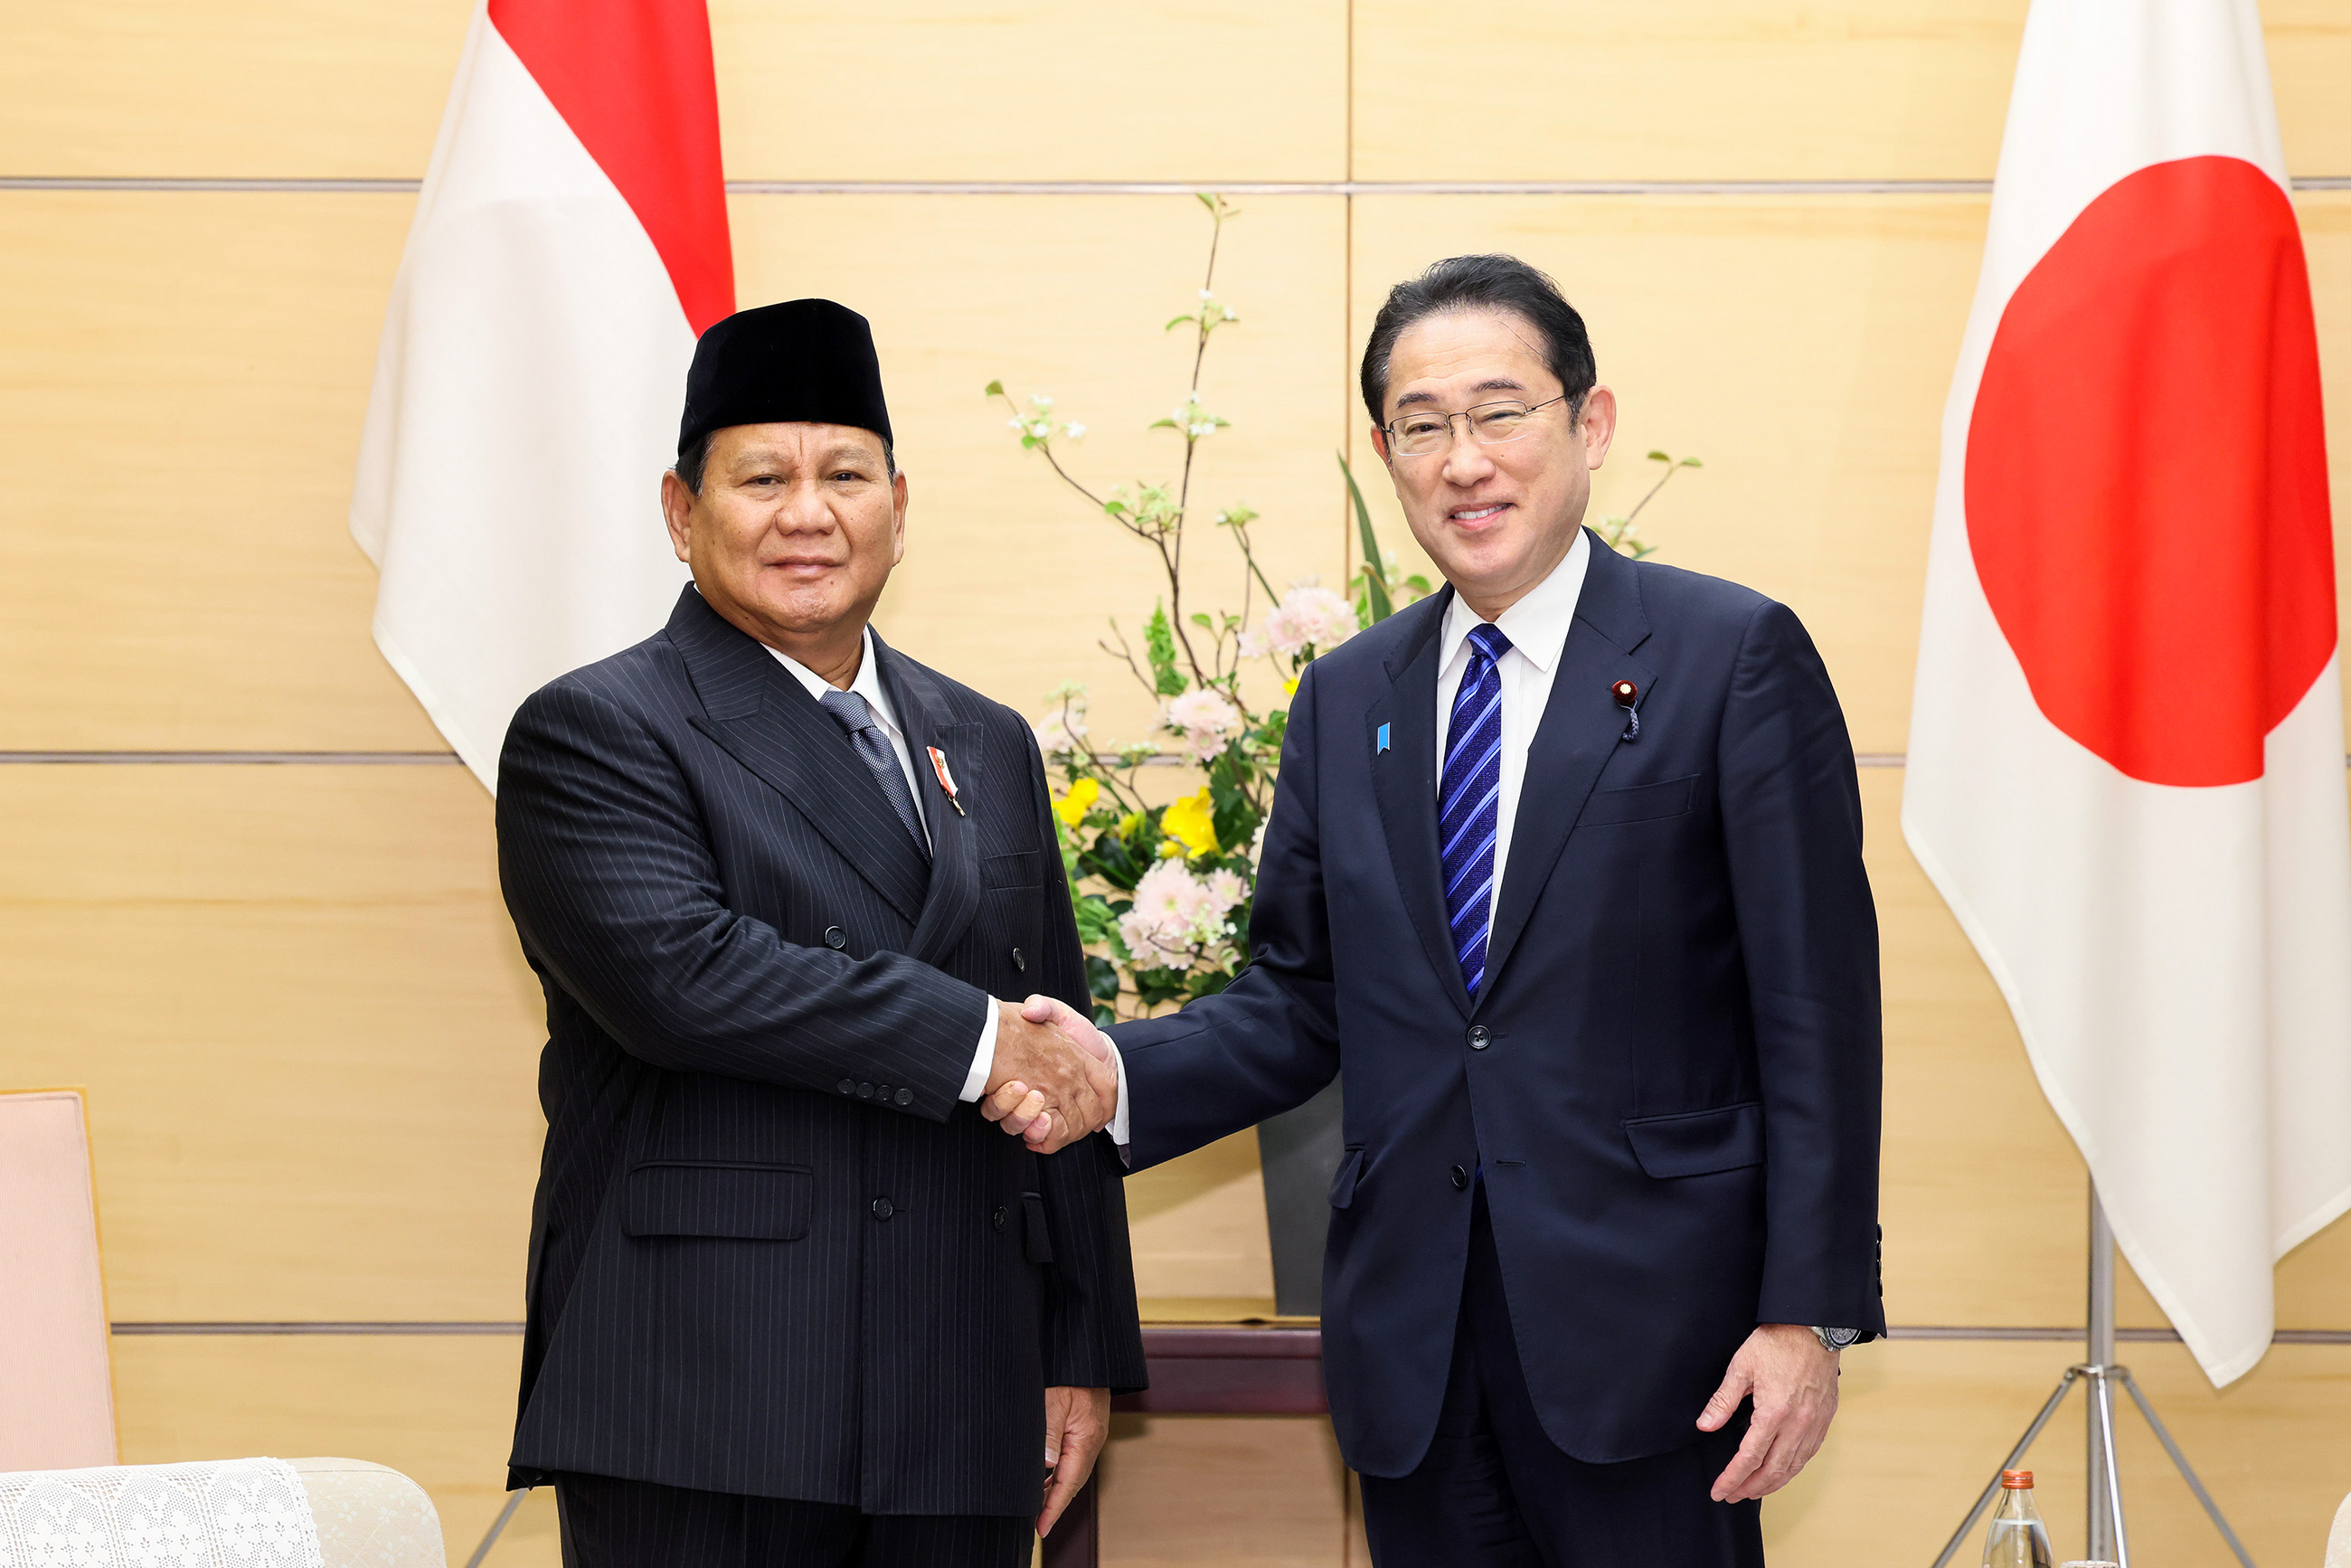 Courtesy Call from President-elect Prabowo of Indonesia